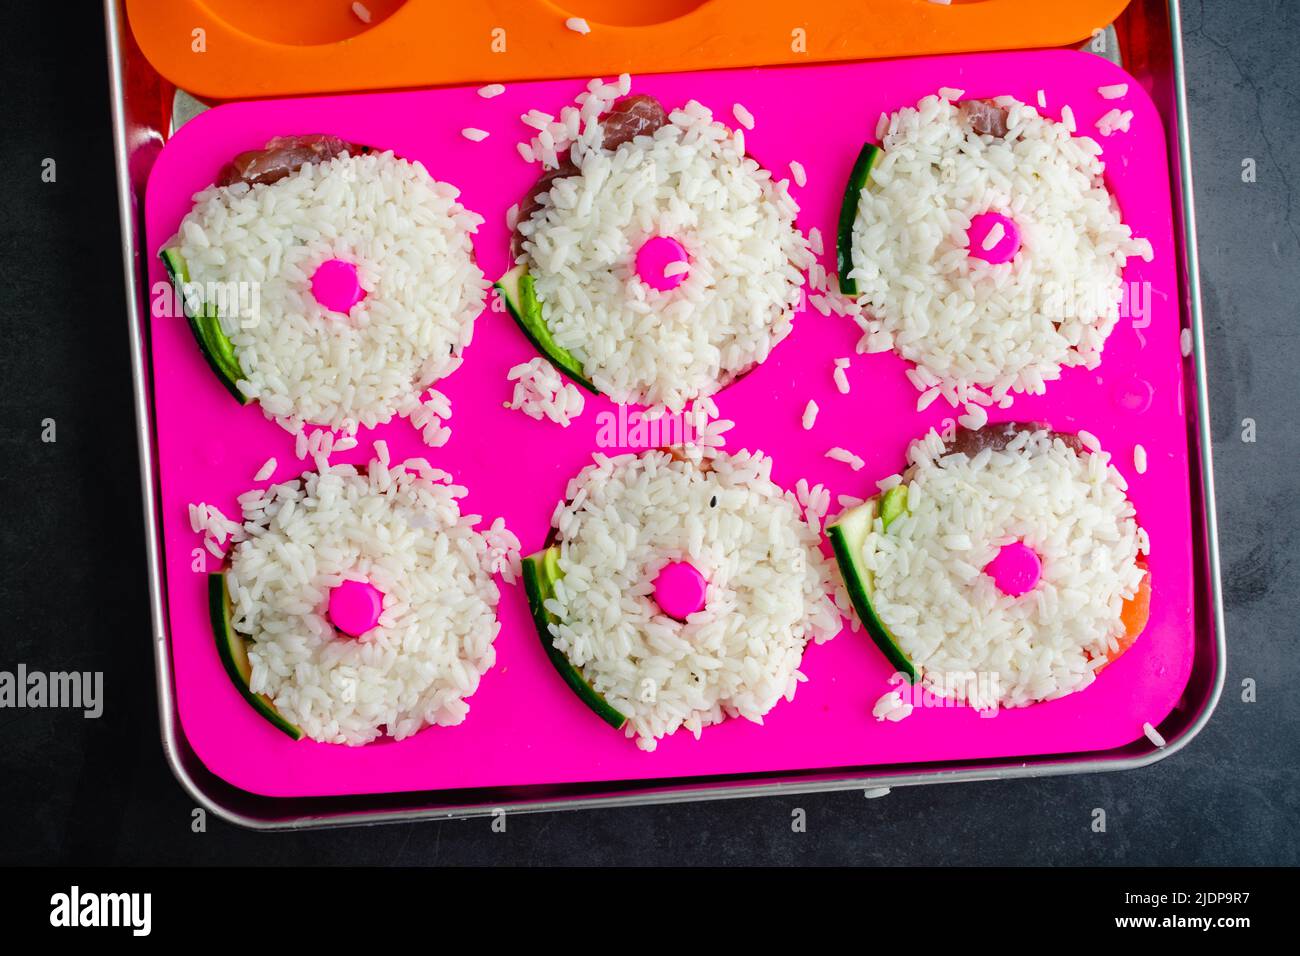 Making Donut Shaped Sushi in a Silicone Mold: Sushi rice pressed into a donut mold over fresh fish and vegetables Stock Photo